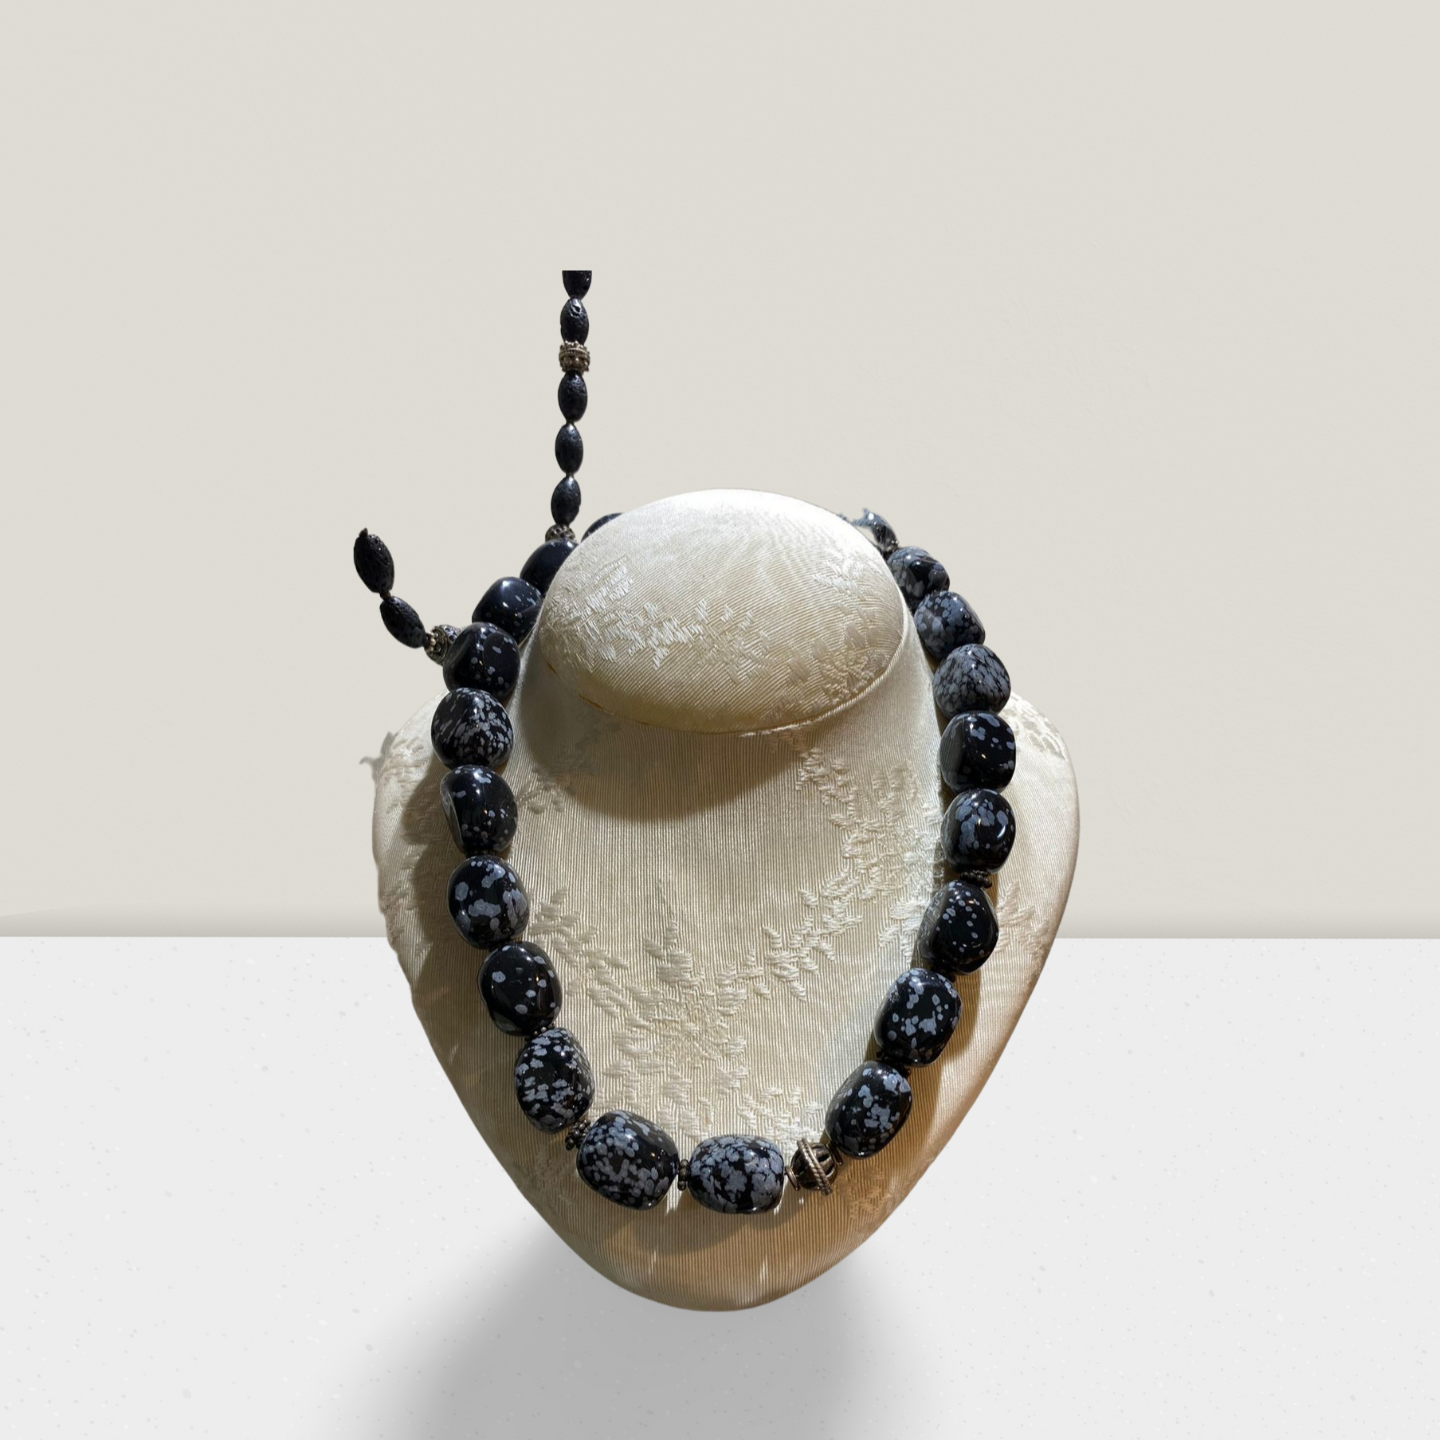 Necklace with Black Onyx stones and sterling silver elements